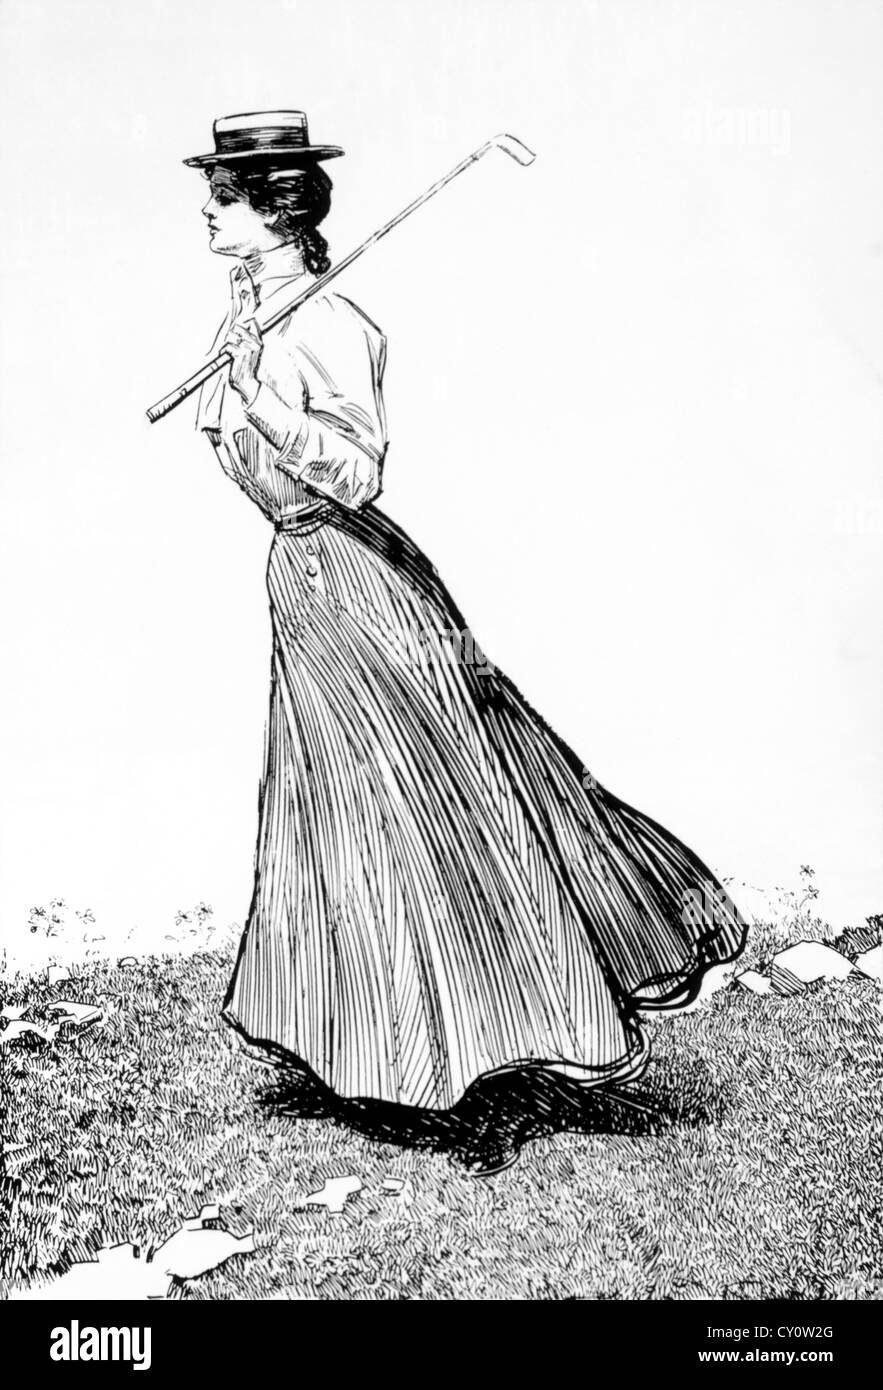 Woman Holding Golf Club, l'école, Gibson Girl, dessin de Charles Dana Gibson, 1899 Banque D'Images